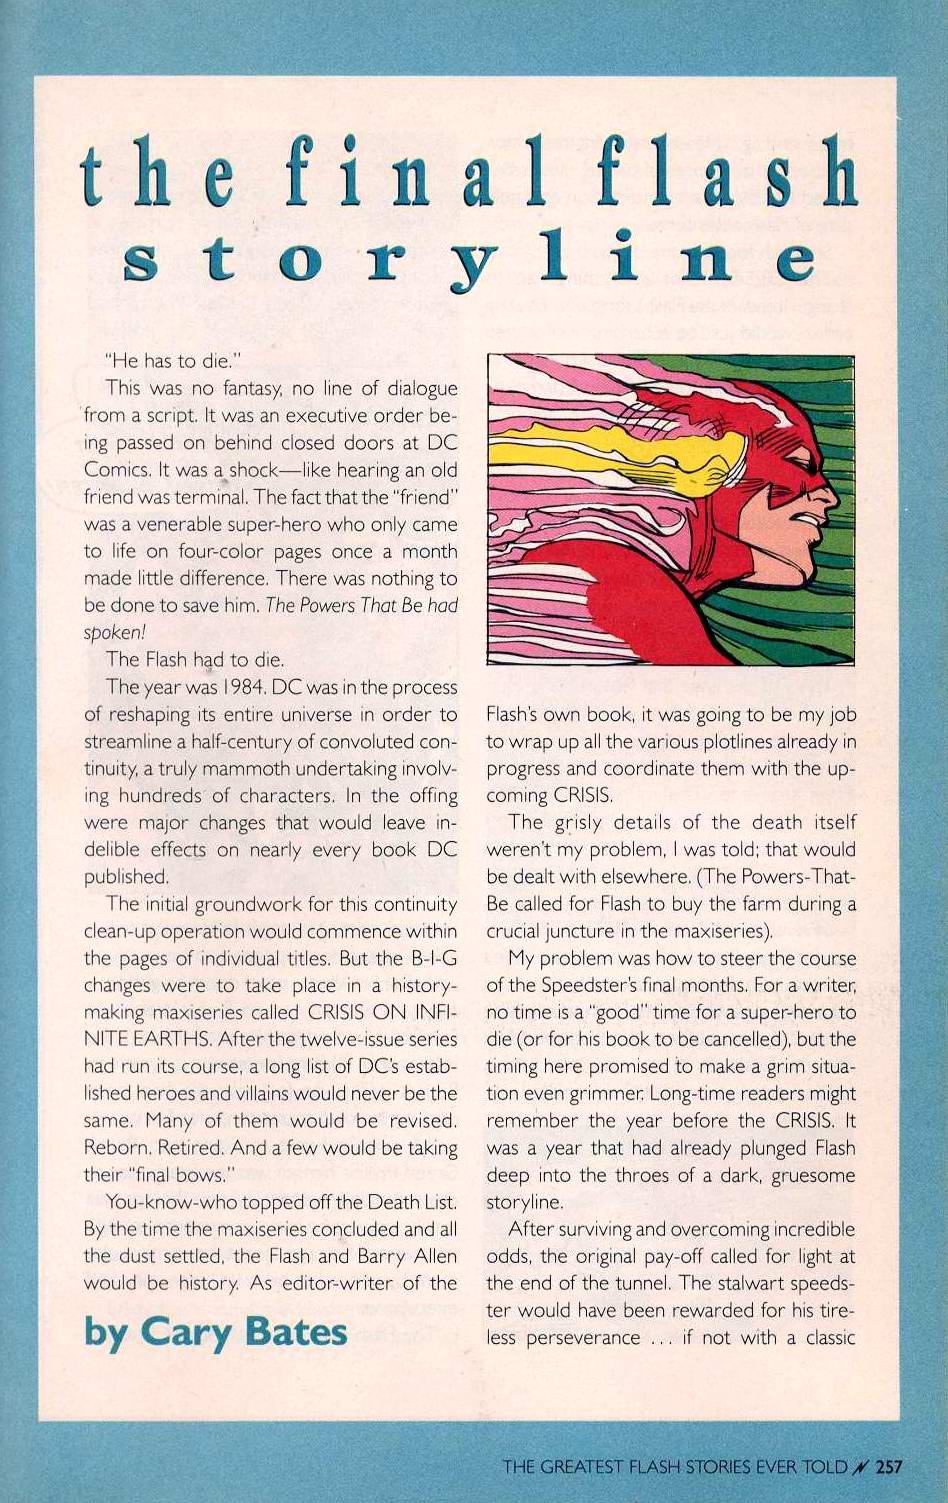 Read online The Greatest Flash Stories Ever Told comic -  Issue # TPB - 259